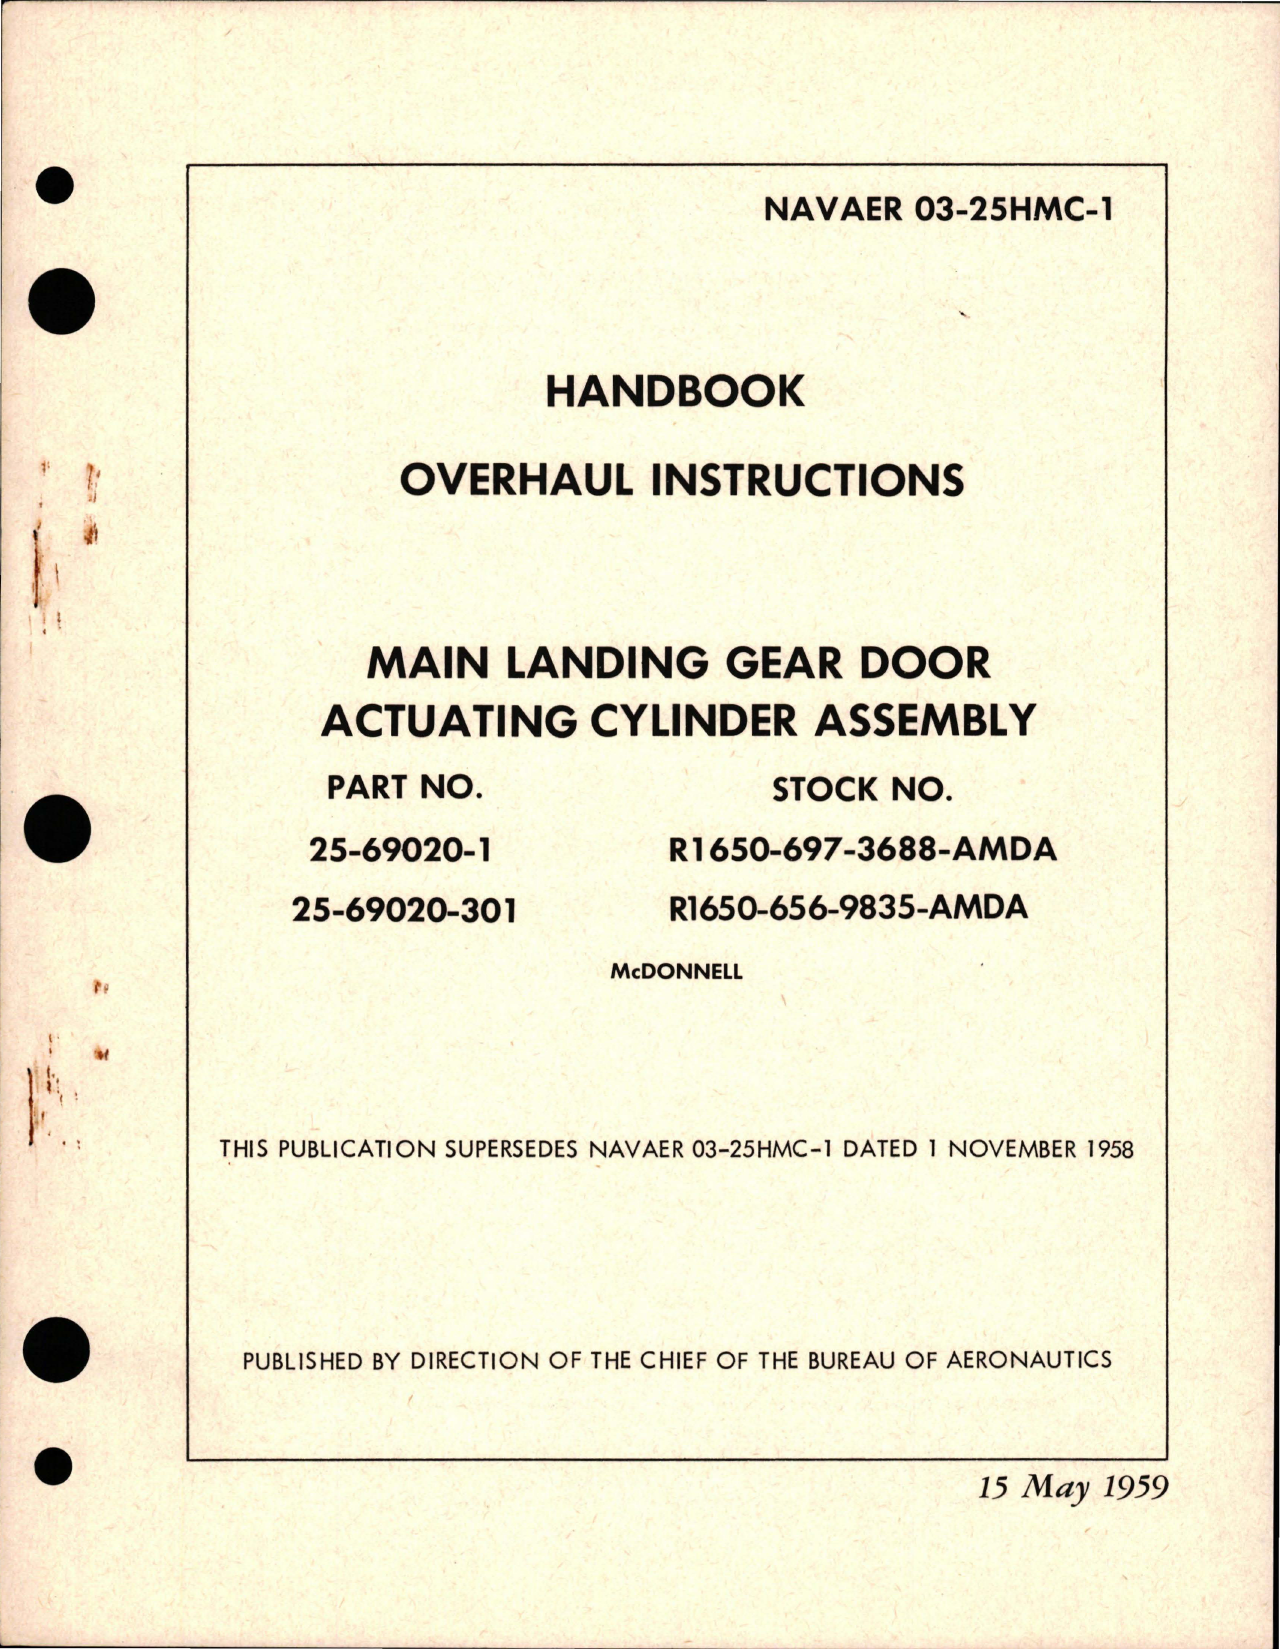 Sample page 1 from AirCorps Library document: Overhaul Instructions for Main Landing Gear Door Actuating Cylinder Assembly - Parts 25-69020-1 and 25-69020-301